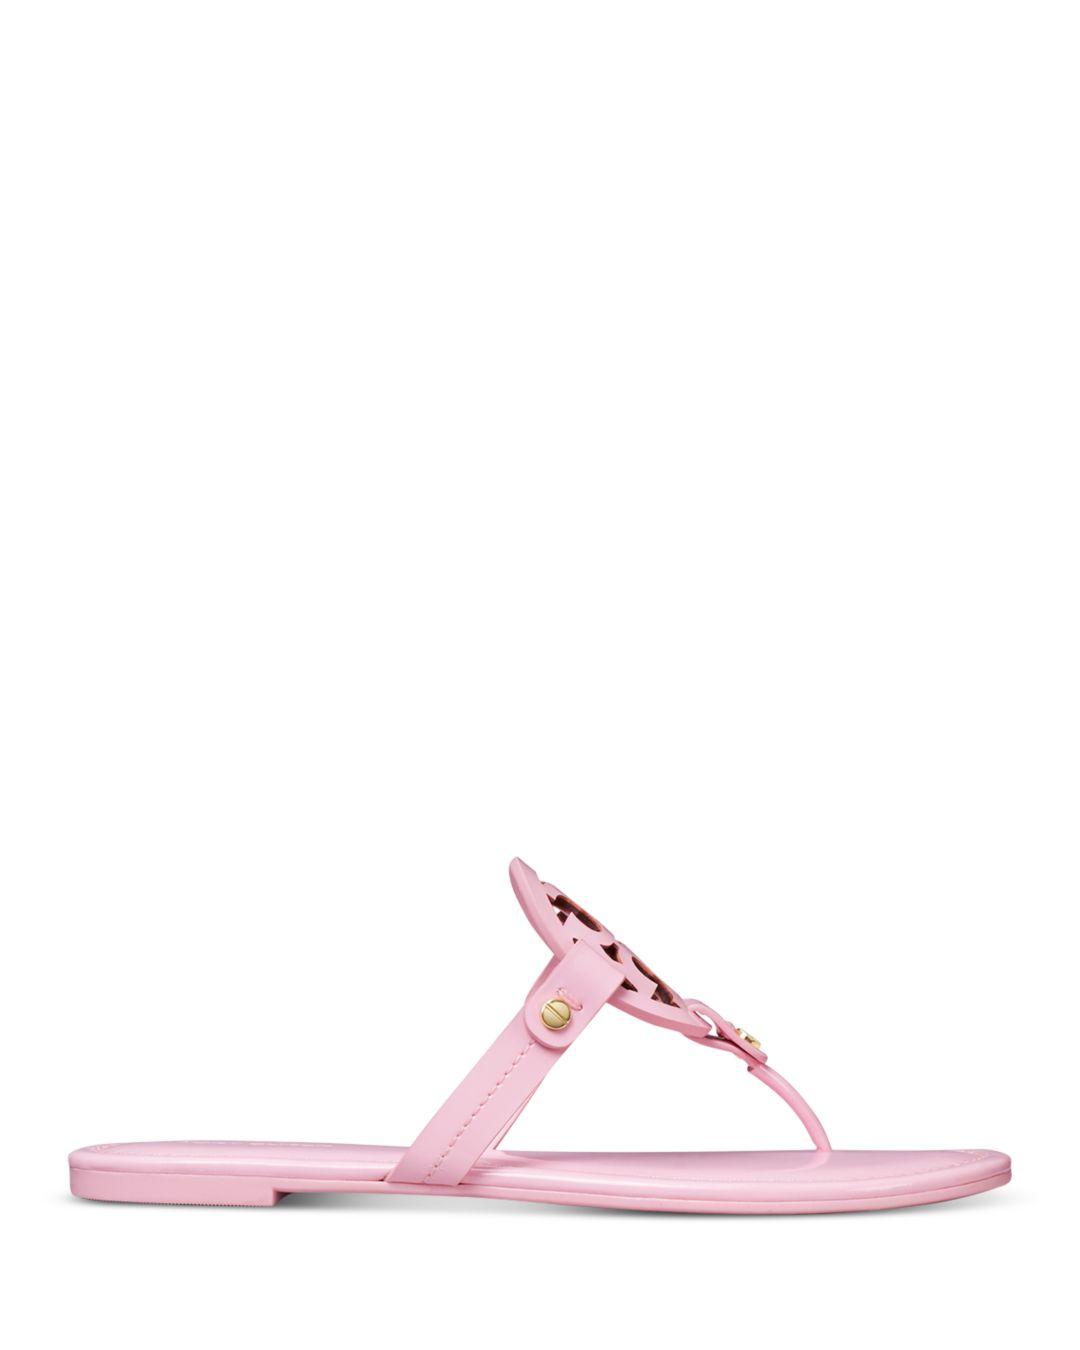 Tory Burch Miller Thong Sandals in Pink | Lyst